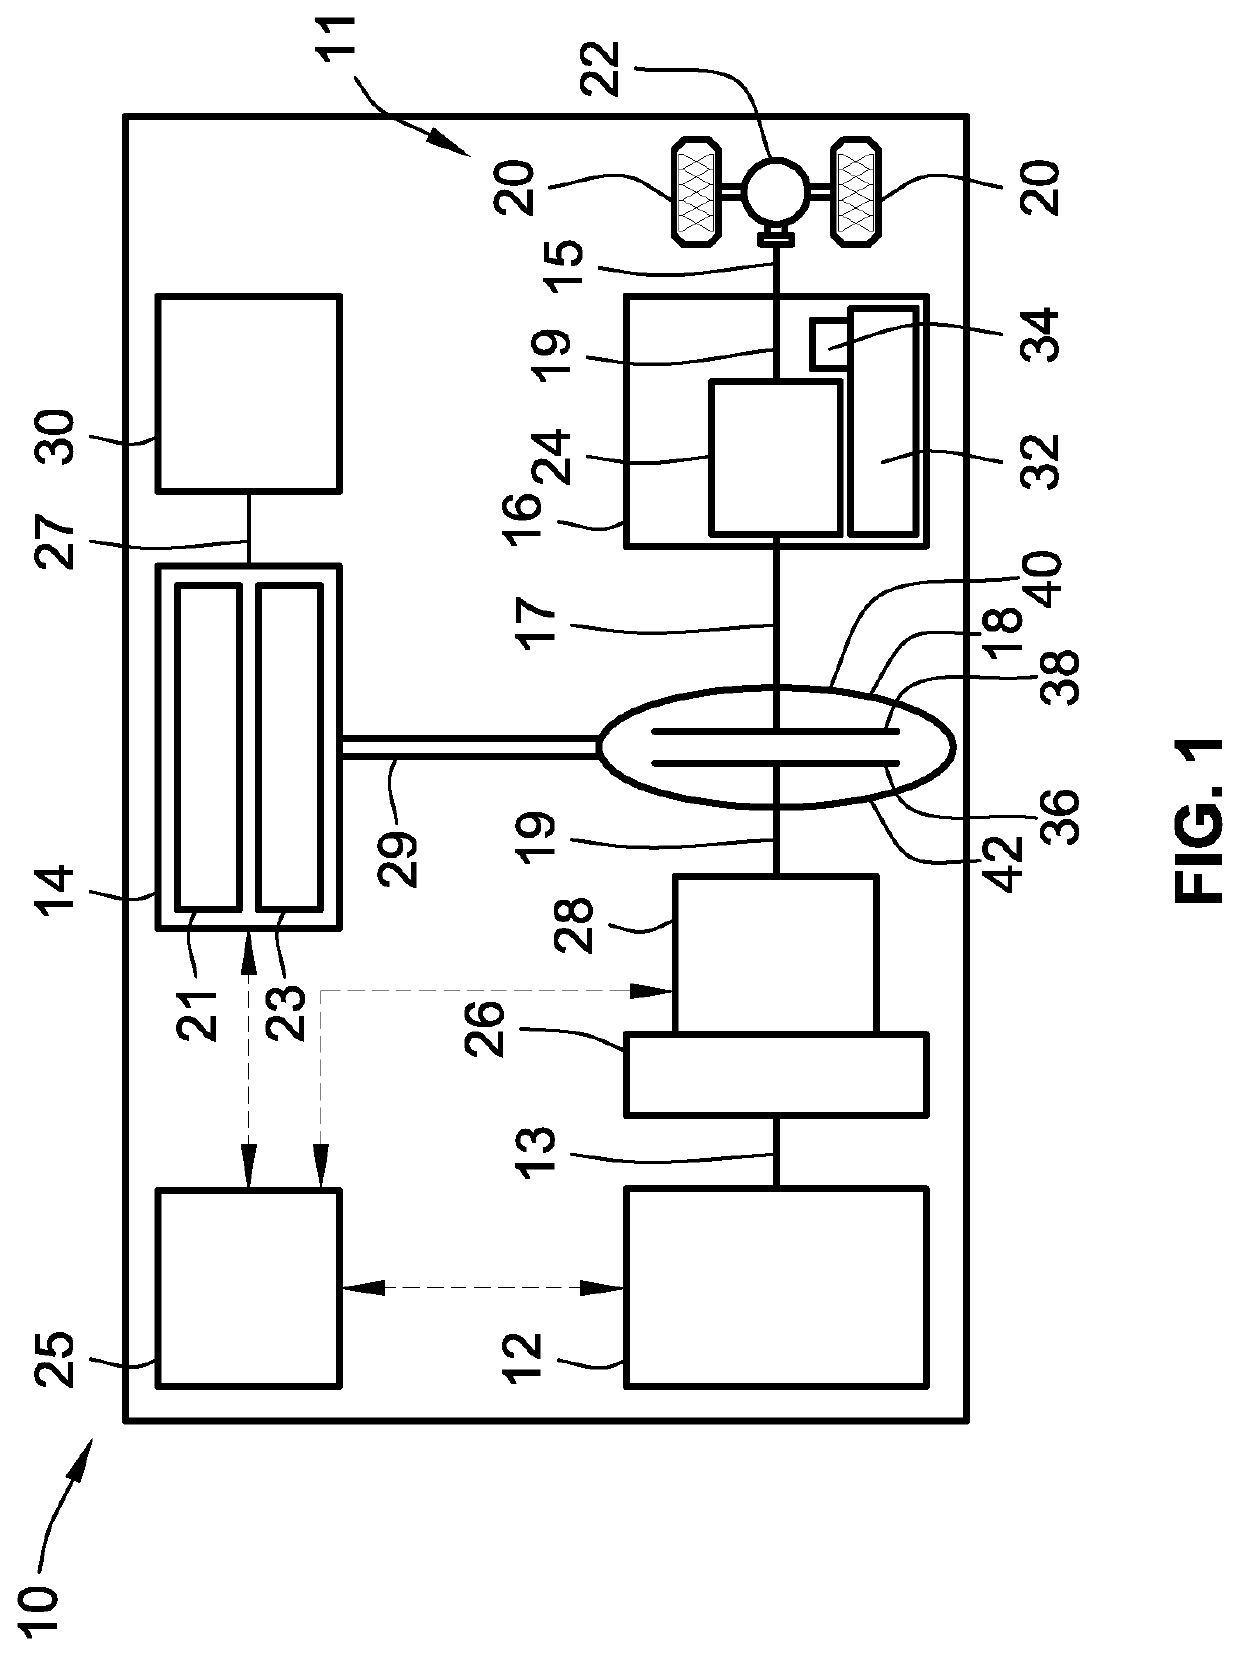 Back-to-back selectable one-way clutches for engine disconnect devices of motor vehicle powertrains